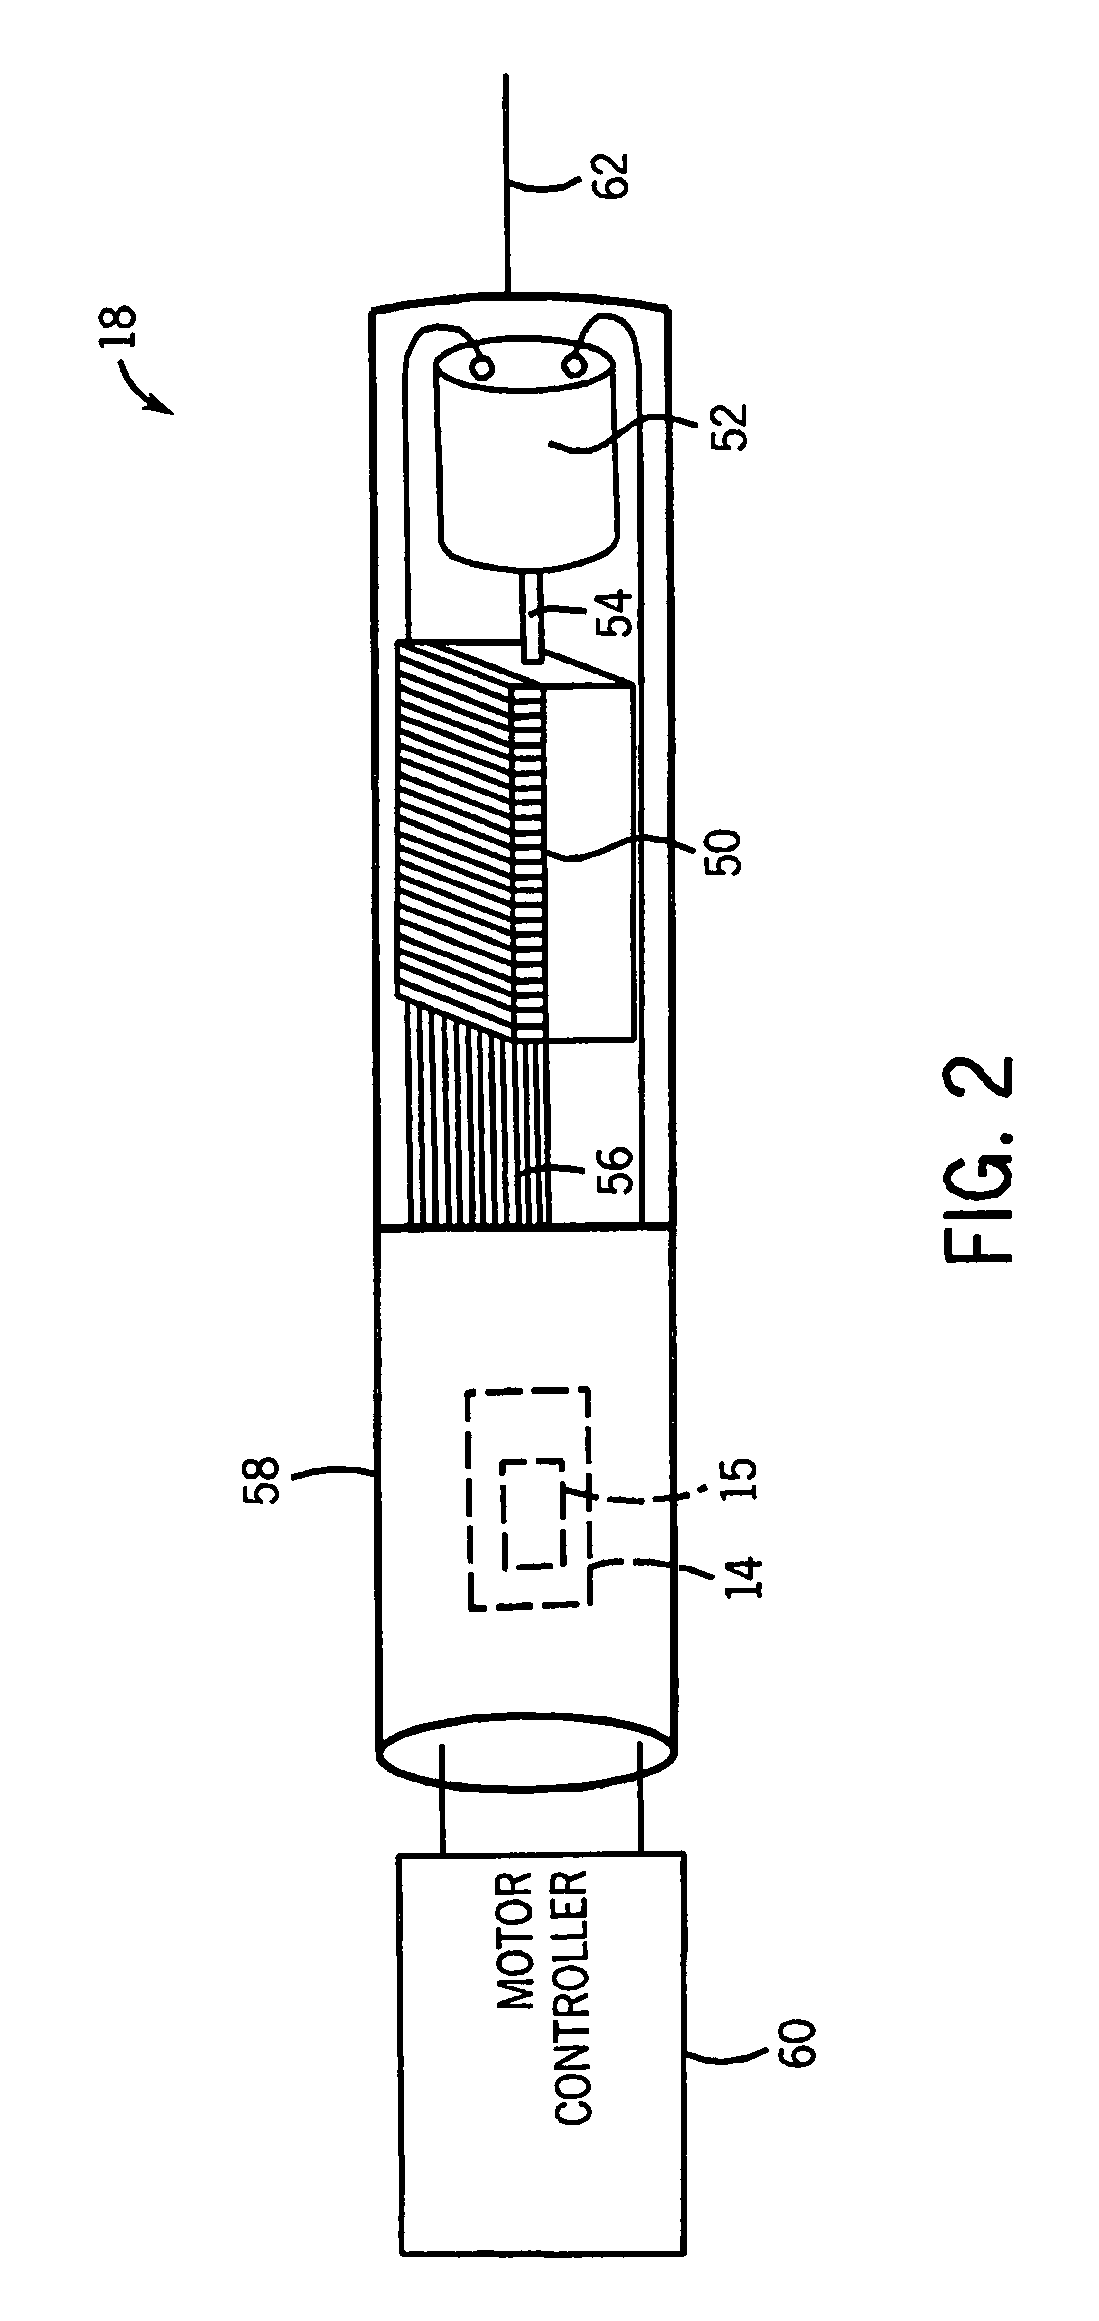 Navigation and imaging system sychronized with respiratory and/or cardiac activity